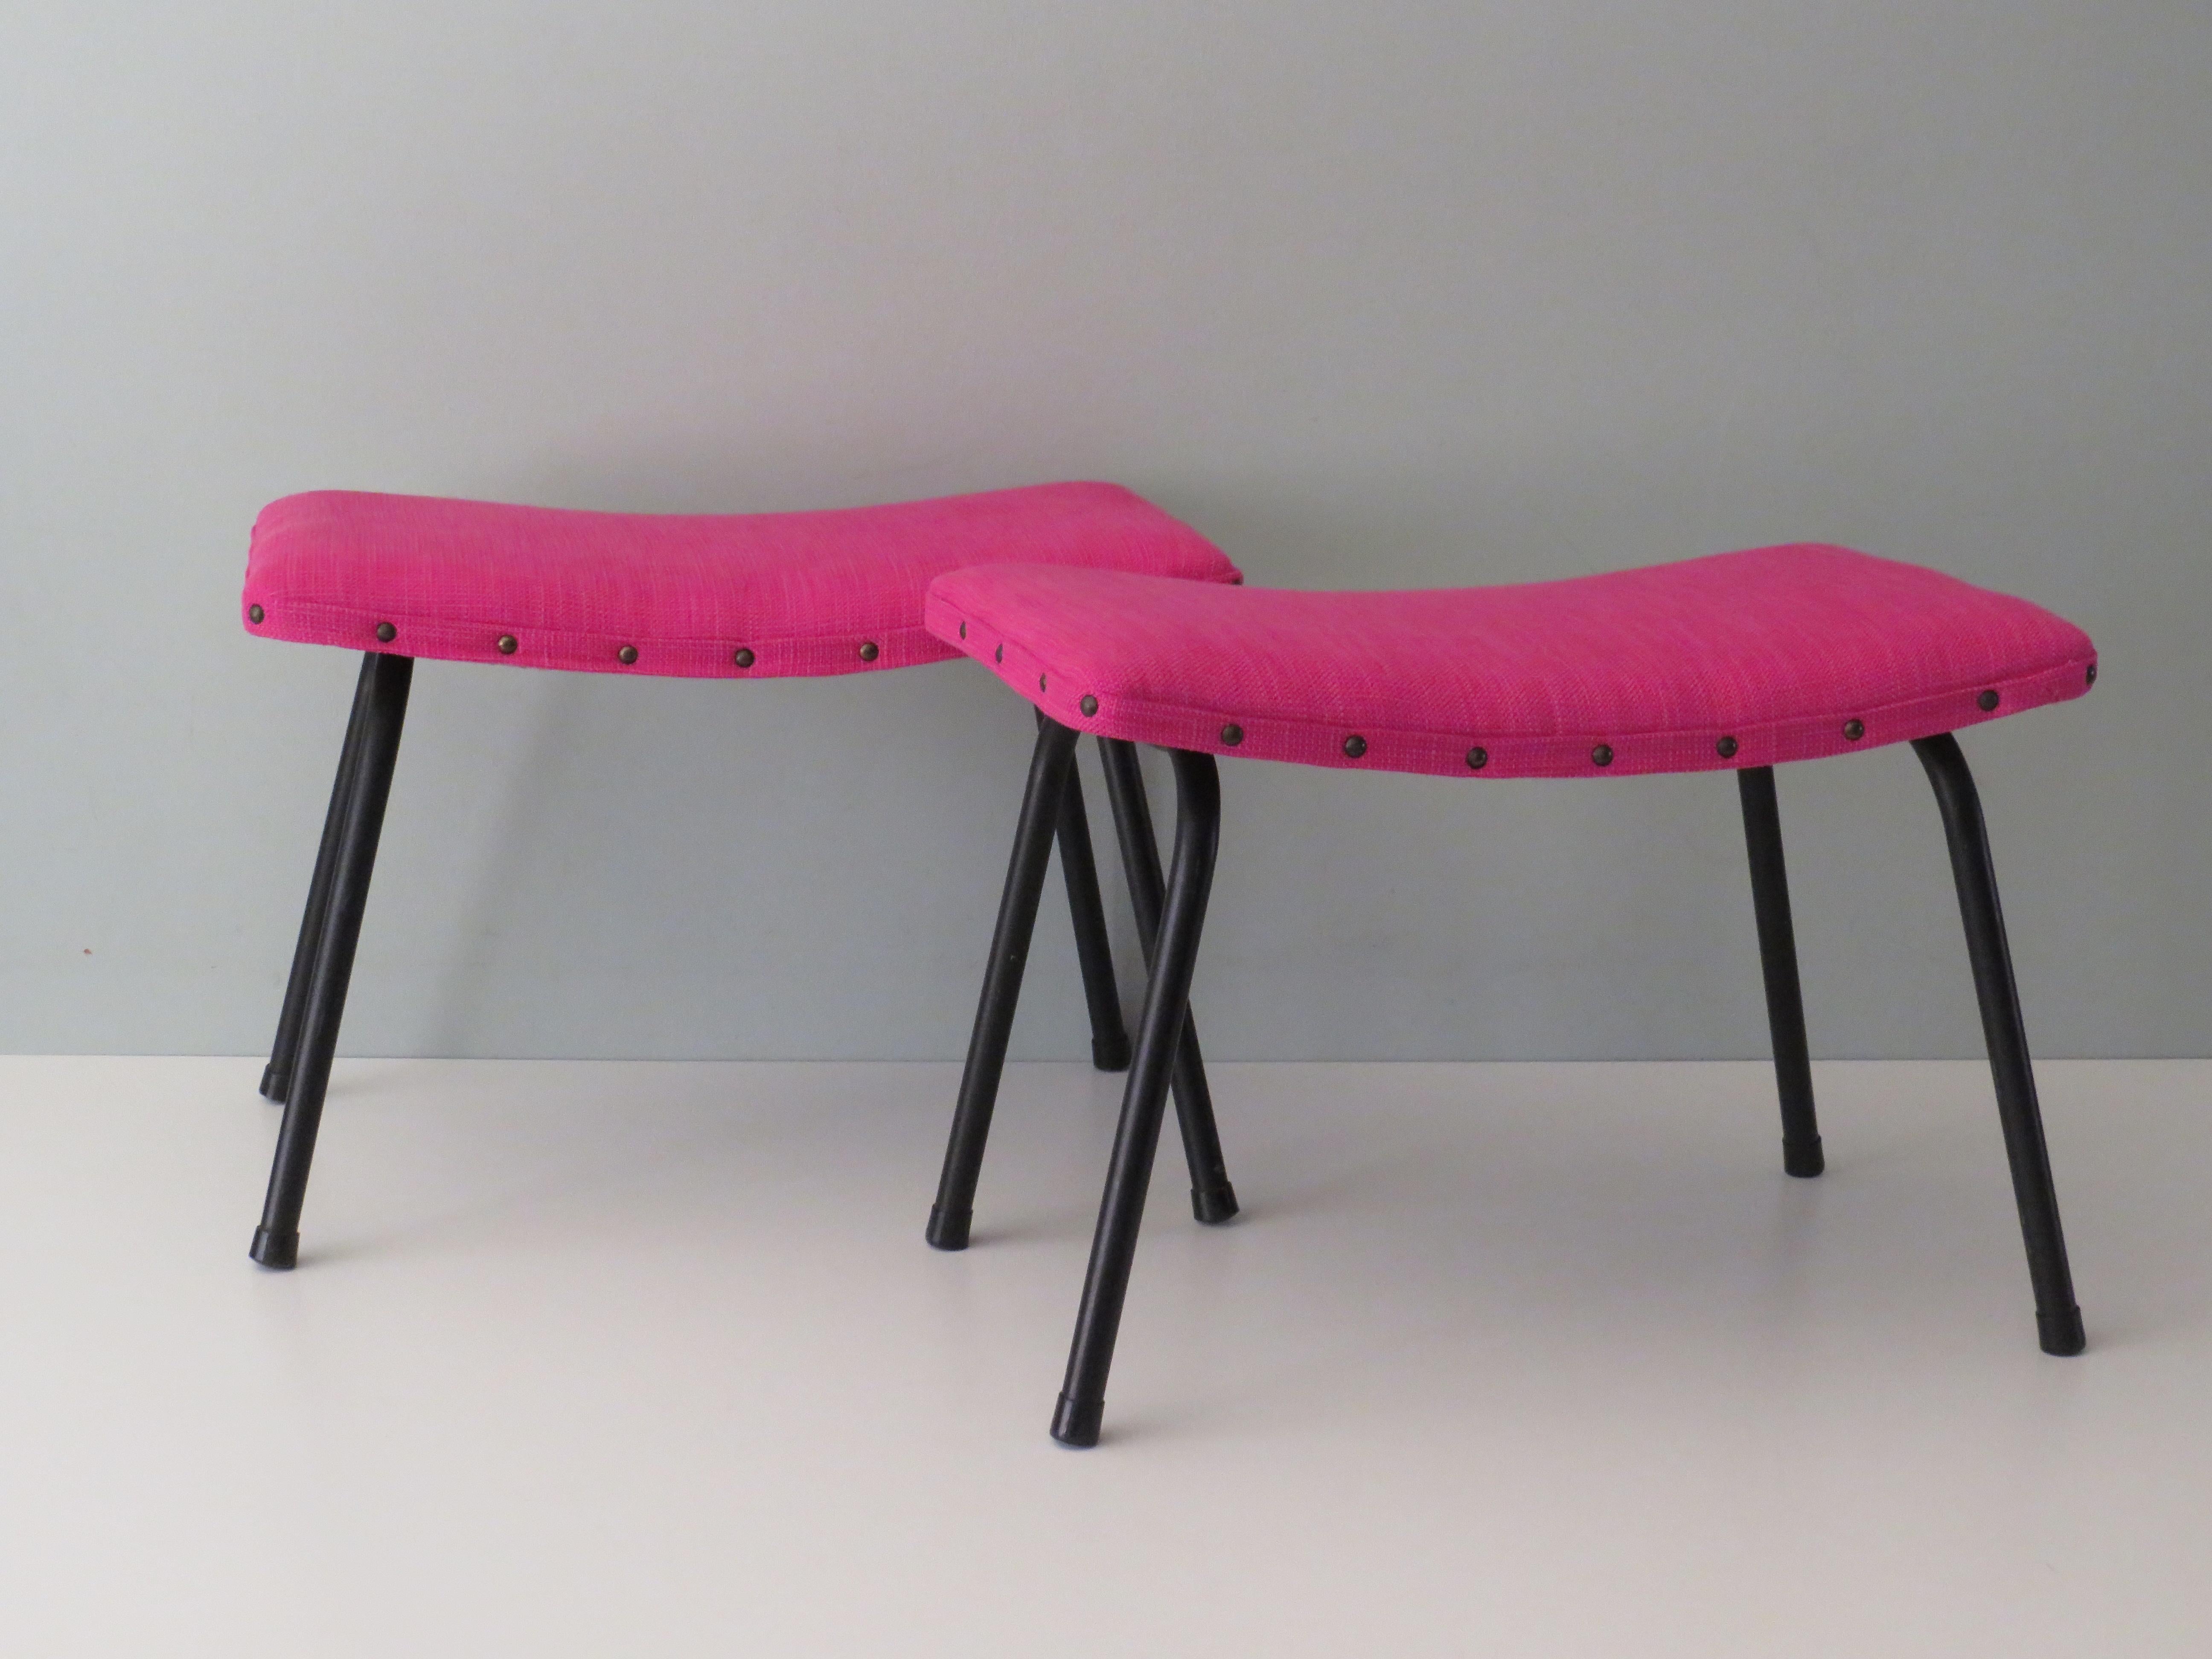 The footstools are designed by Guariche but produced by Sartha in Lier Belgium in 1966. They have a matt black lacquered tubular frame base and a new fuschia fabric upholstery.
They have been reupholstered both foam and fabric in the same way as